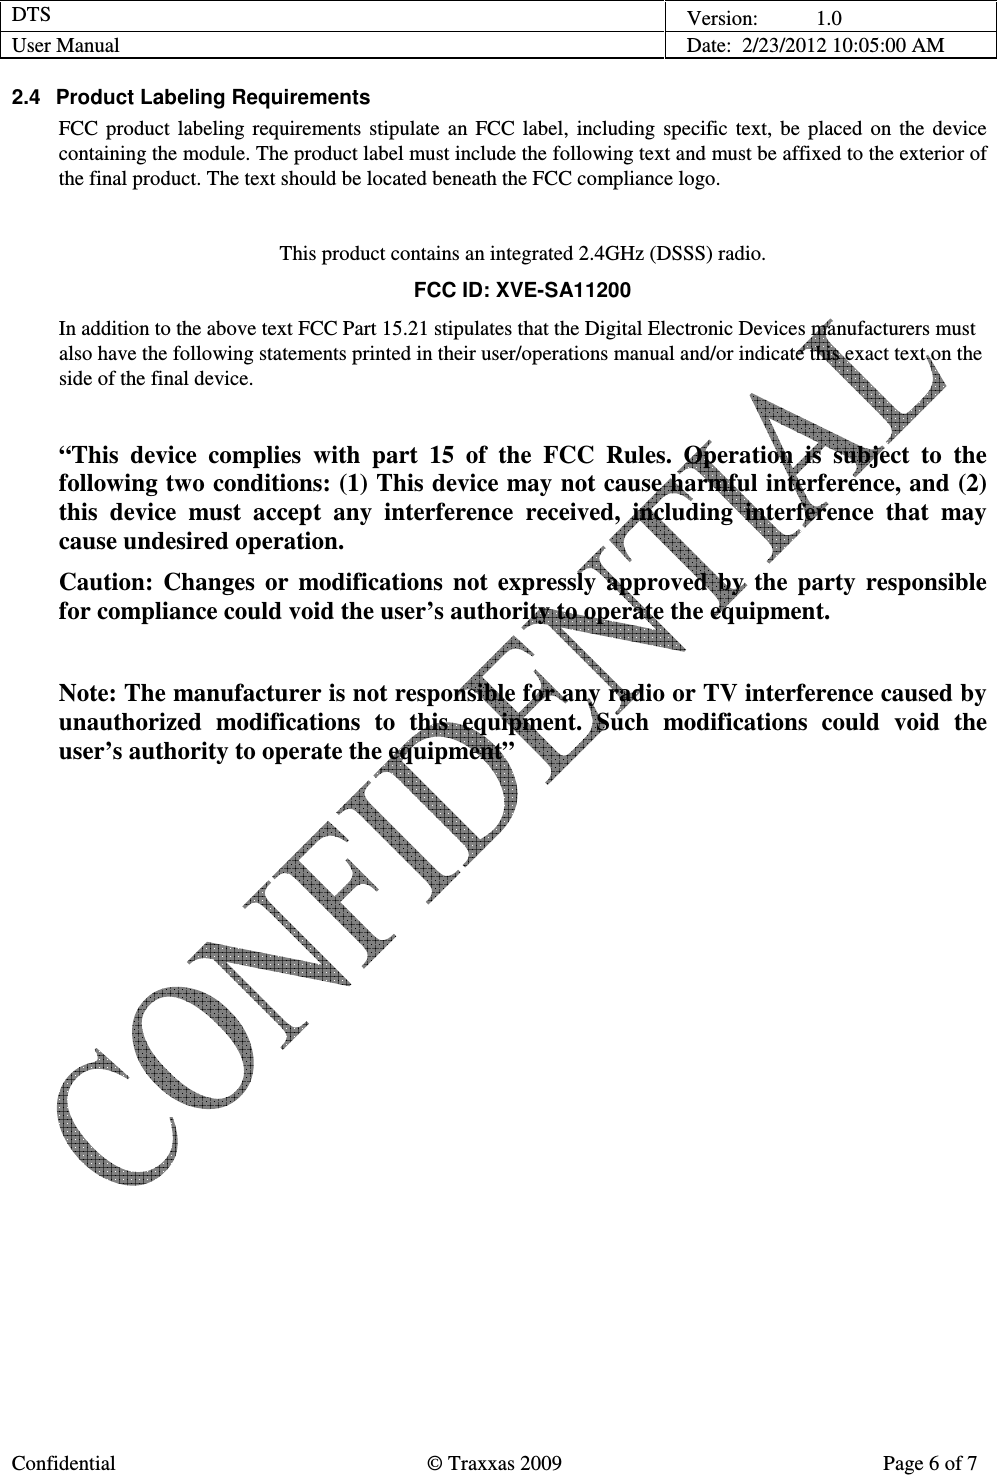 DTS    Version:           1.0 User Manual    Date:  2/23/2012 10:05:00 AM  Confidential  © Traxxas 2009  Page 6 of 7  2.4  Product Labeling Requirements FCC  product  labeling  requirements  stipulate  an  FCC  label,  including  specific  text,  be  placed  on  the  device containing the module. The product label must include the following text and must be affixed to the exterior of the final product. The text should be located beneath the FCC compliance logo.  This product contains an integrated 2.4GHz (DSSS) radio. FCC ID: XVE-SA11200 In addition to the above text FCC Part 15.21 stipulates that the Digital Electronic Devices manufacturers must also have the following statements printed in their user/operations manual and/or indicate this exact text on the side of the final device.  “This  device  complies  with  part  15  of  the  FCC  Rules.  Operation  is  subject  to  the following two conditions: (1) This device may not cause harmful interference, and (2) this  device  must  accept  any  interference  received,  including  interference  that  may cause undesired operation. Caution:  Changes  or  modifications  not  expressly  approved  by  the  party  responsible for compliance could void the user’s authority to operate the equipment.  Note: The manufacturer is not responsible for any radio or TV interference caused by unauthorized  modifications  to  this  equipment.  Such  modifications  could  void  the user’s authority to operate the equipment”  